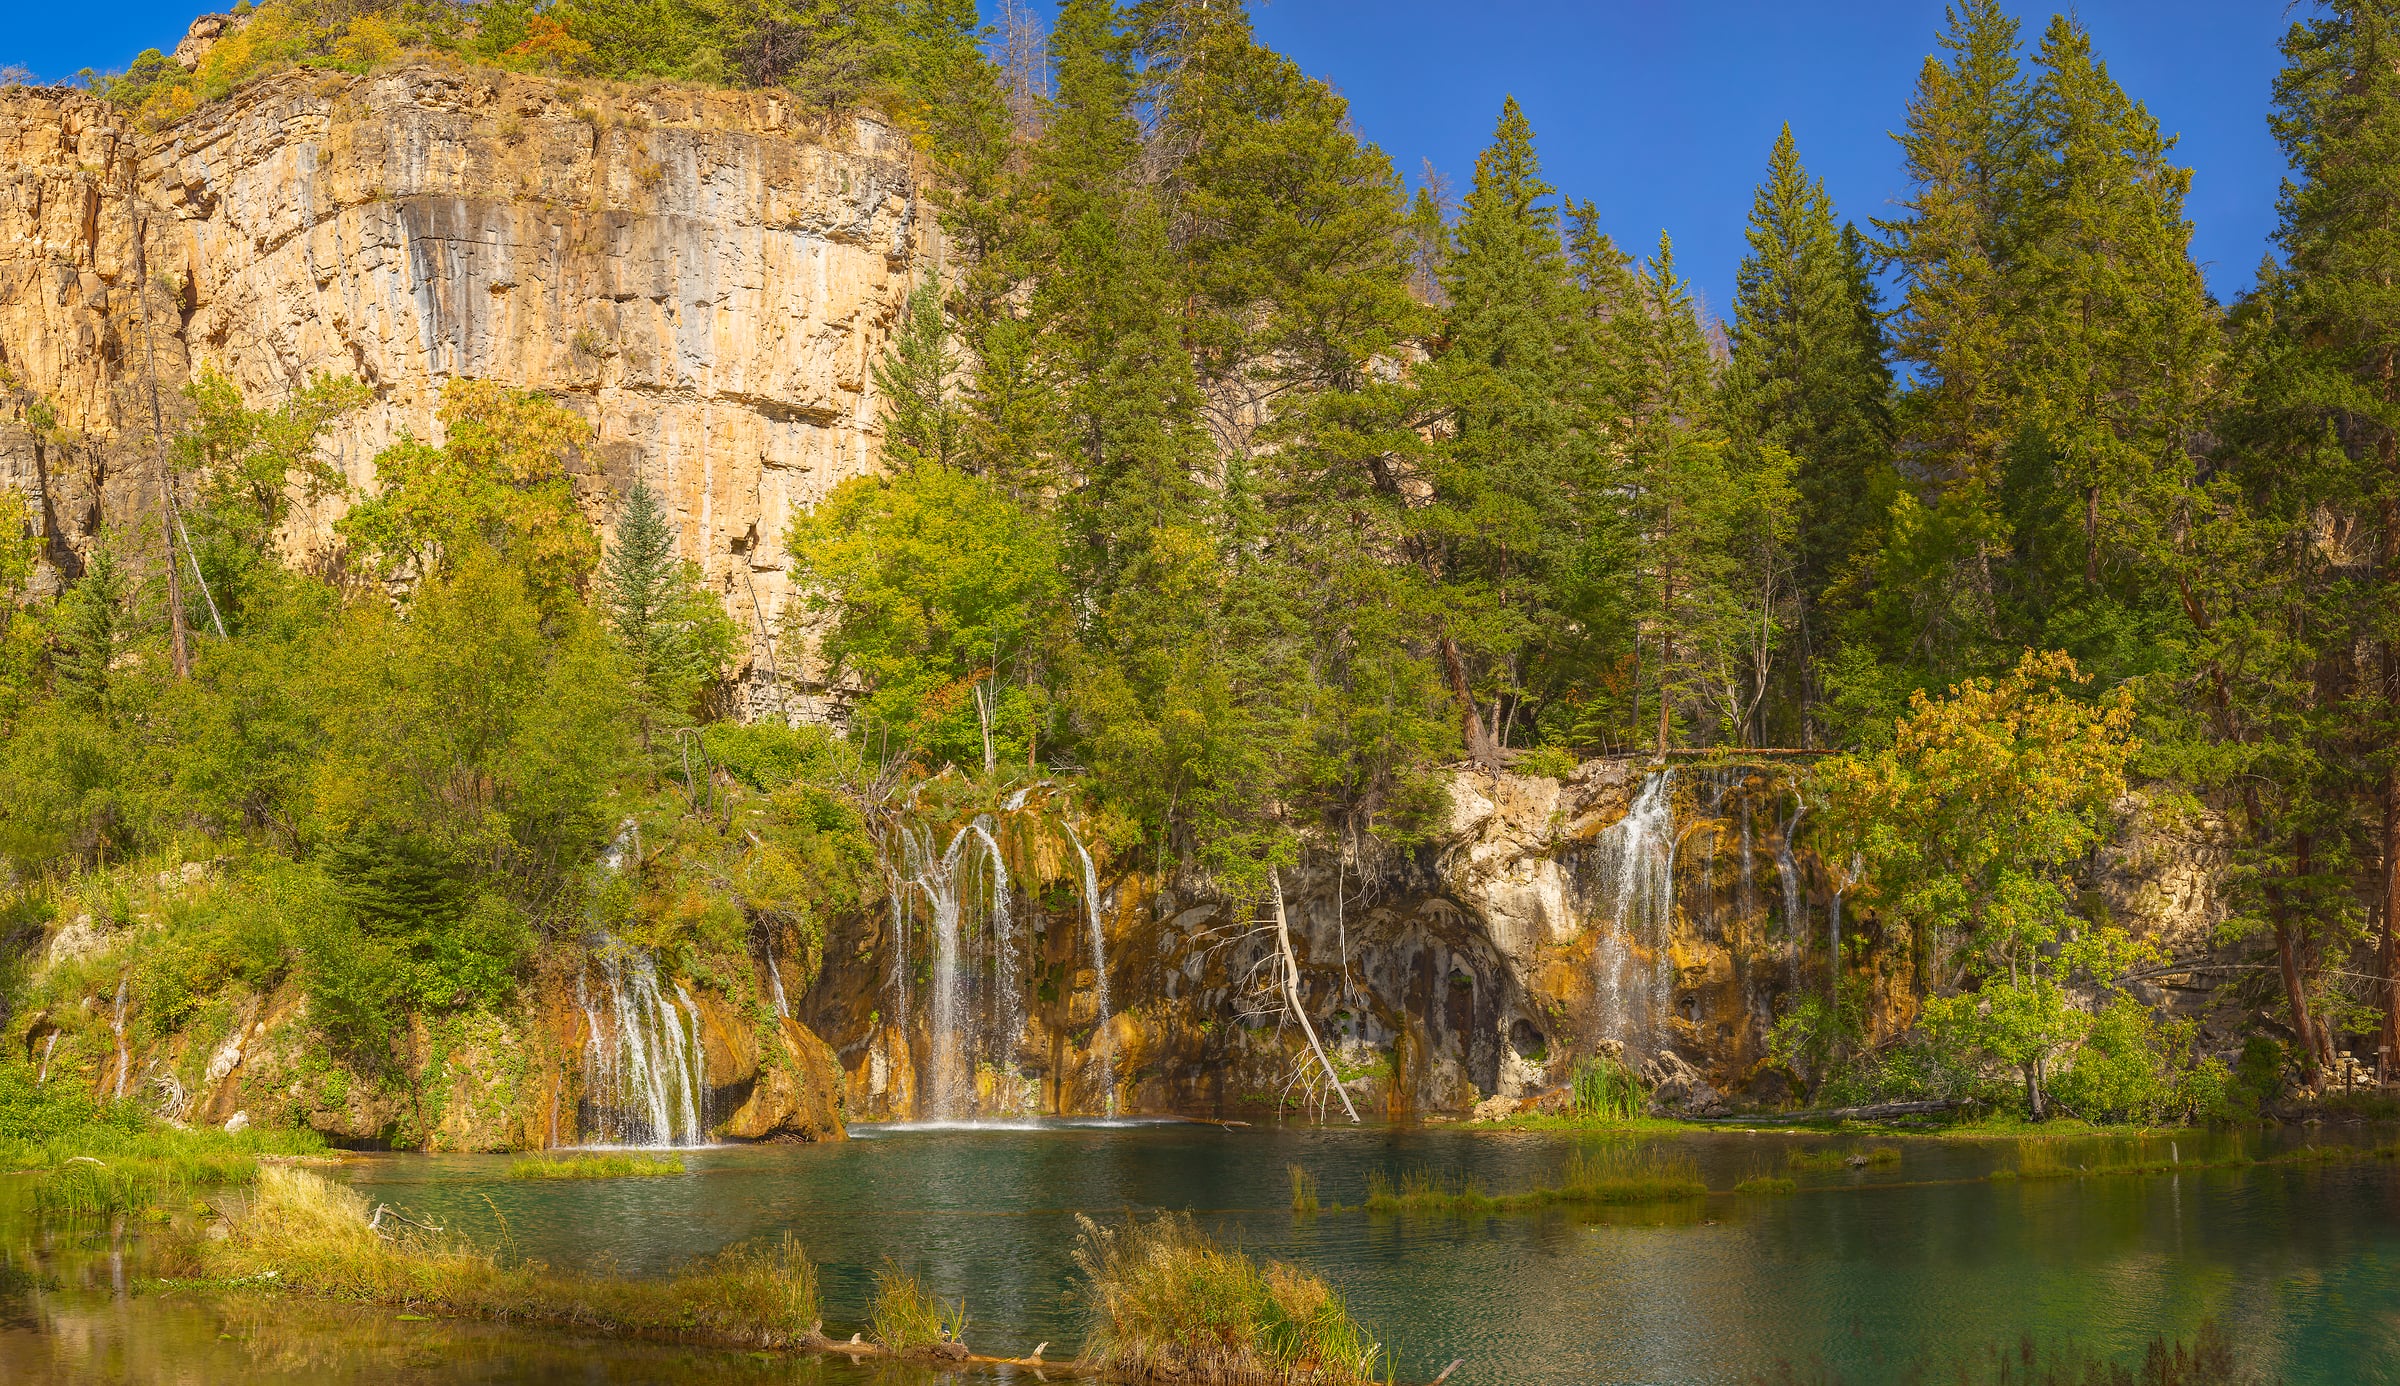 5,903 megapixels! A very high resolution, large-format VAST photo print of a small lake with waterfalls, trees, and cliffs; nature photograph created by John Freeman in Hanging Lake, Glenwood Canyon, Colorado.